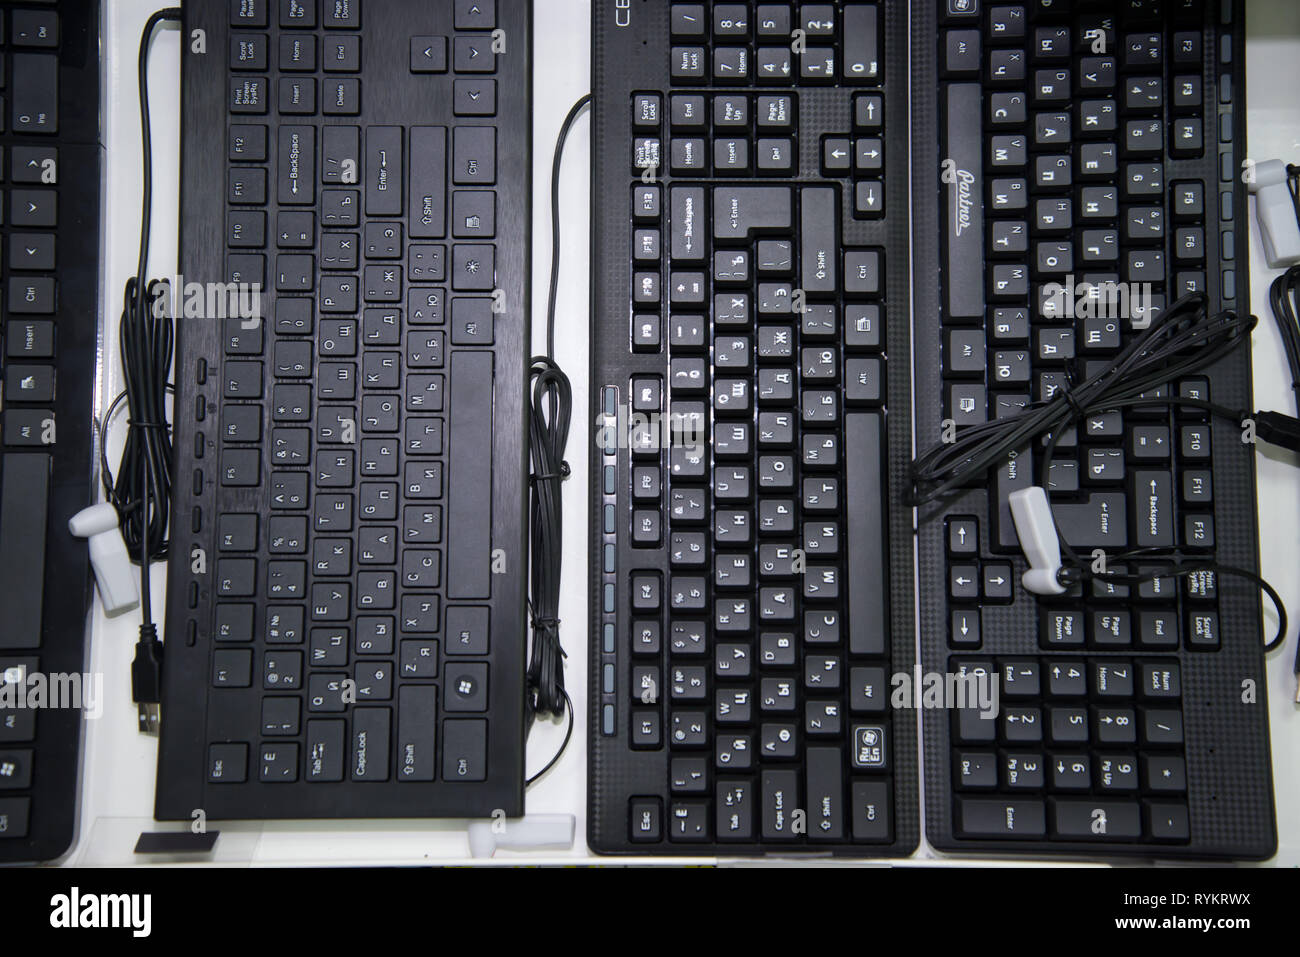 Chelyabinsk Region, Russia - February 2019. Black keyboard for a computer with a Russian font on the storefront. Stock Photo